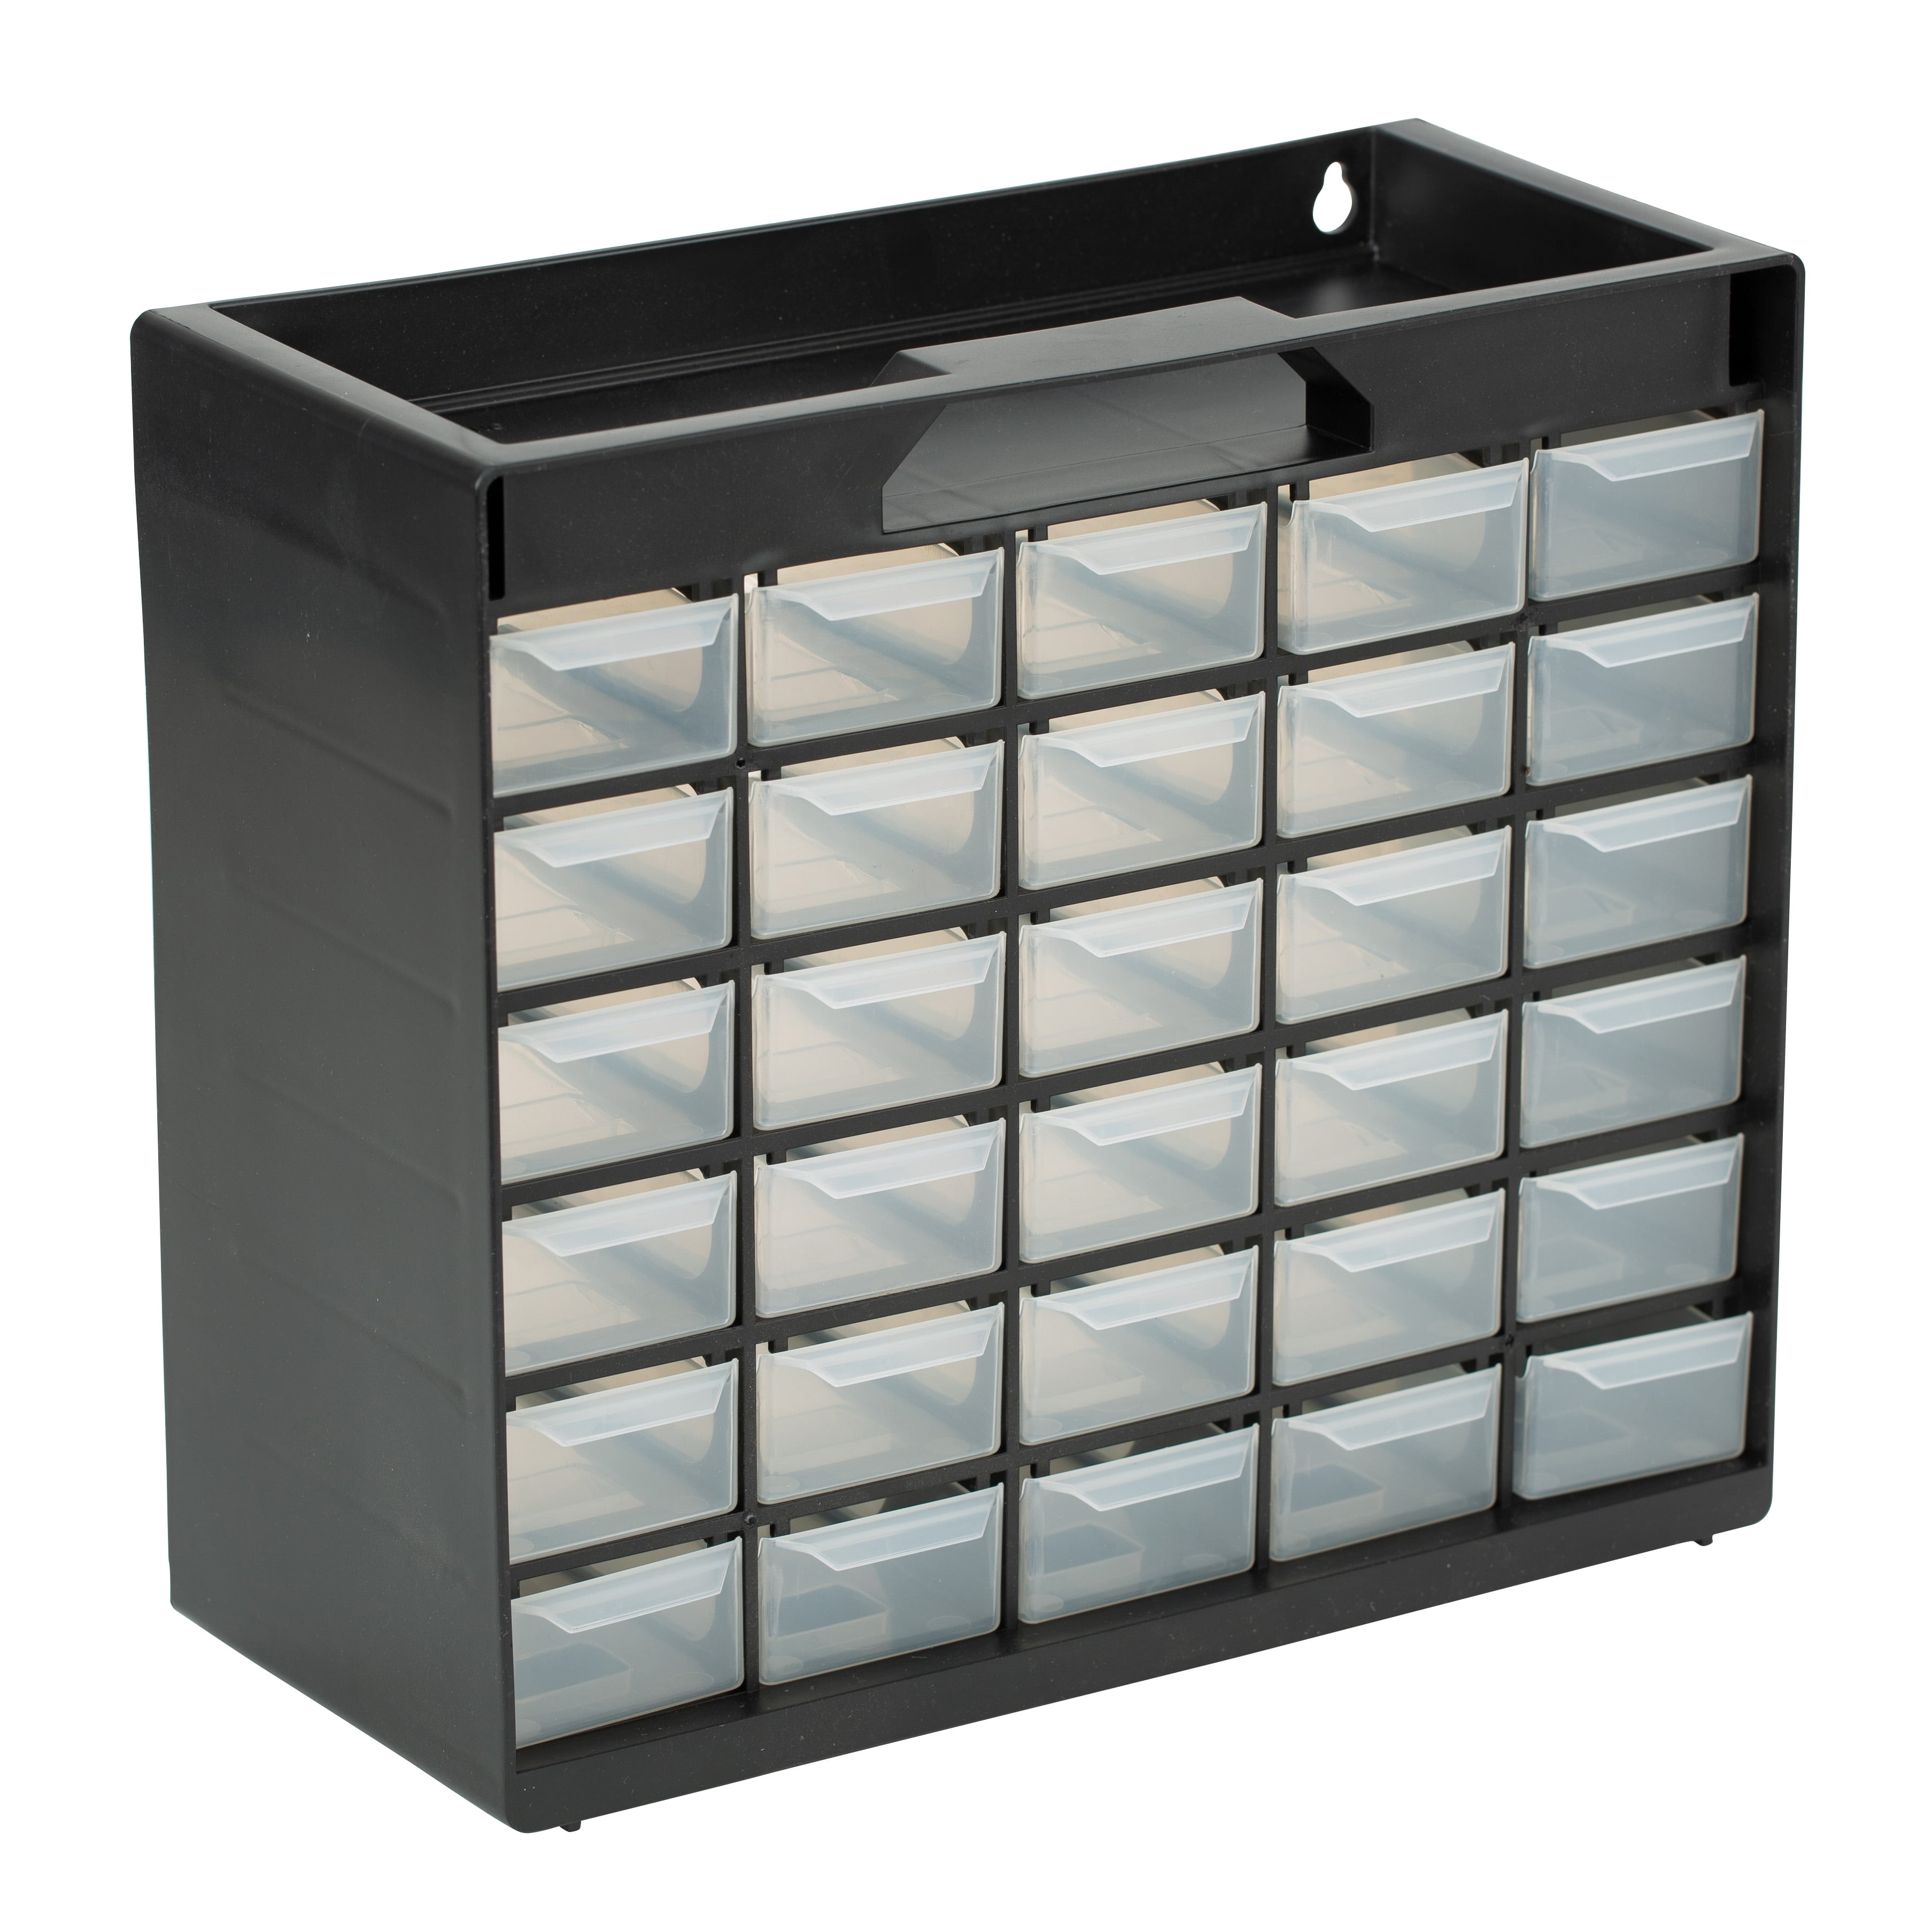 12-inch Tool Box with Tray and Organizers Includes Three Small Parts Boxes